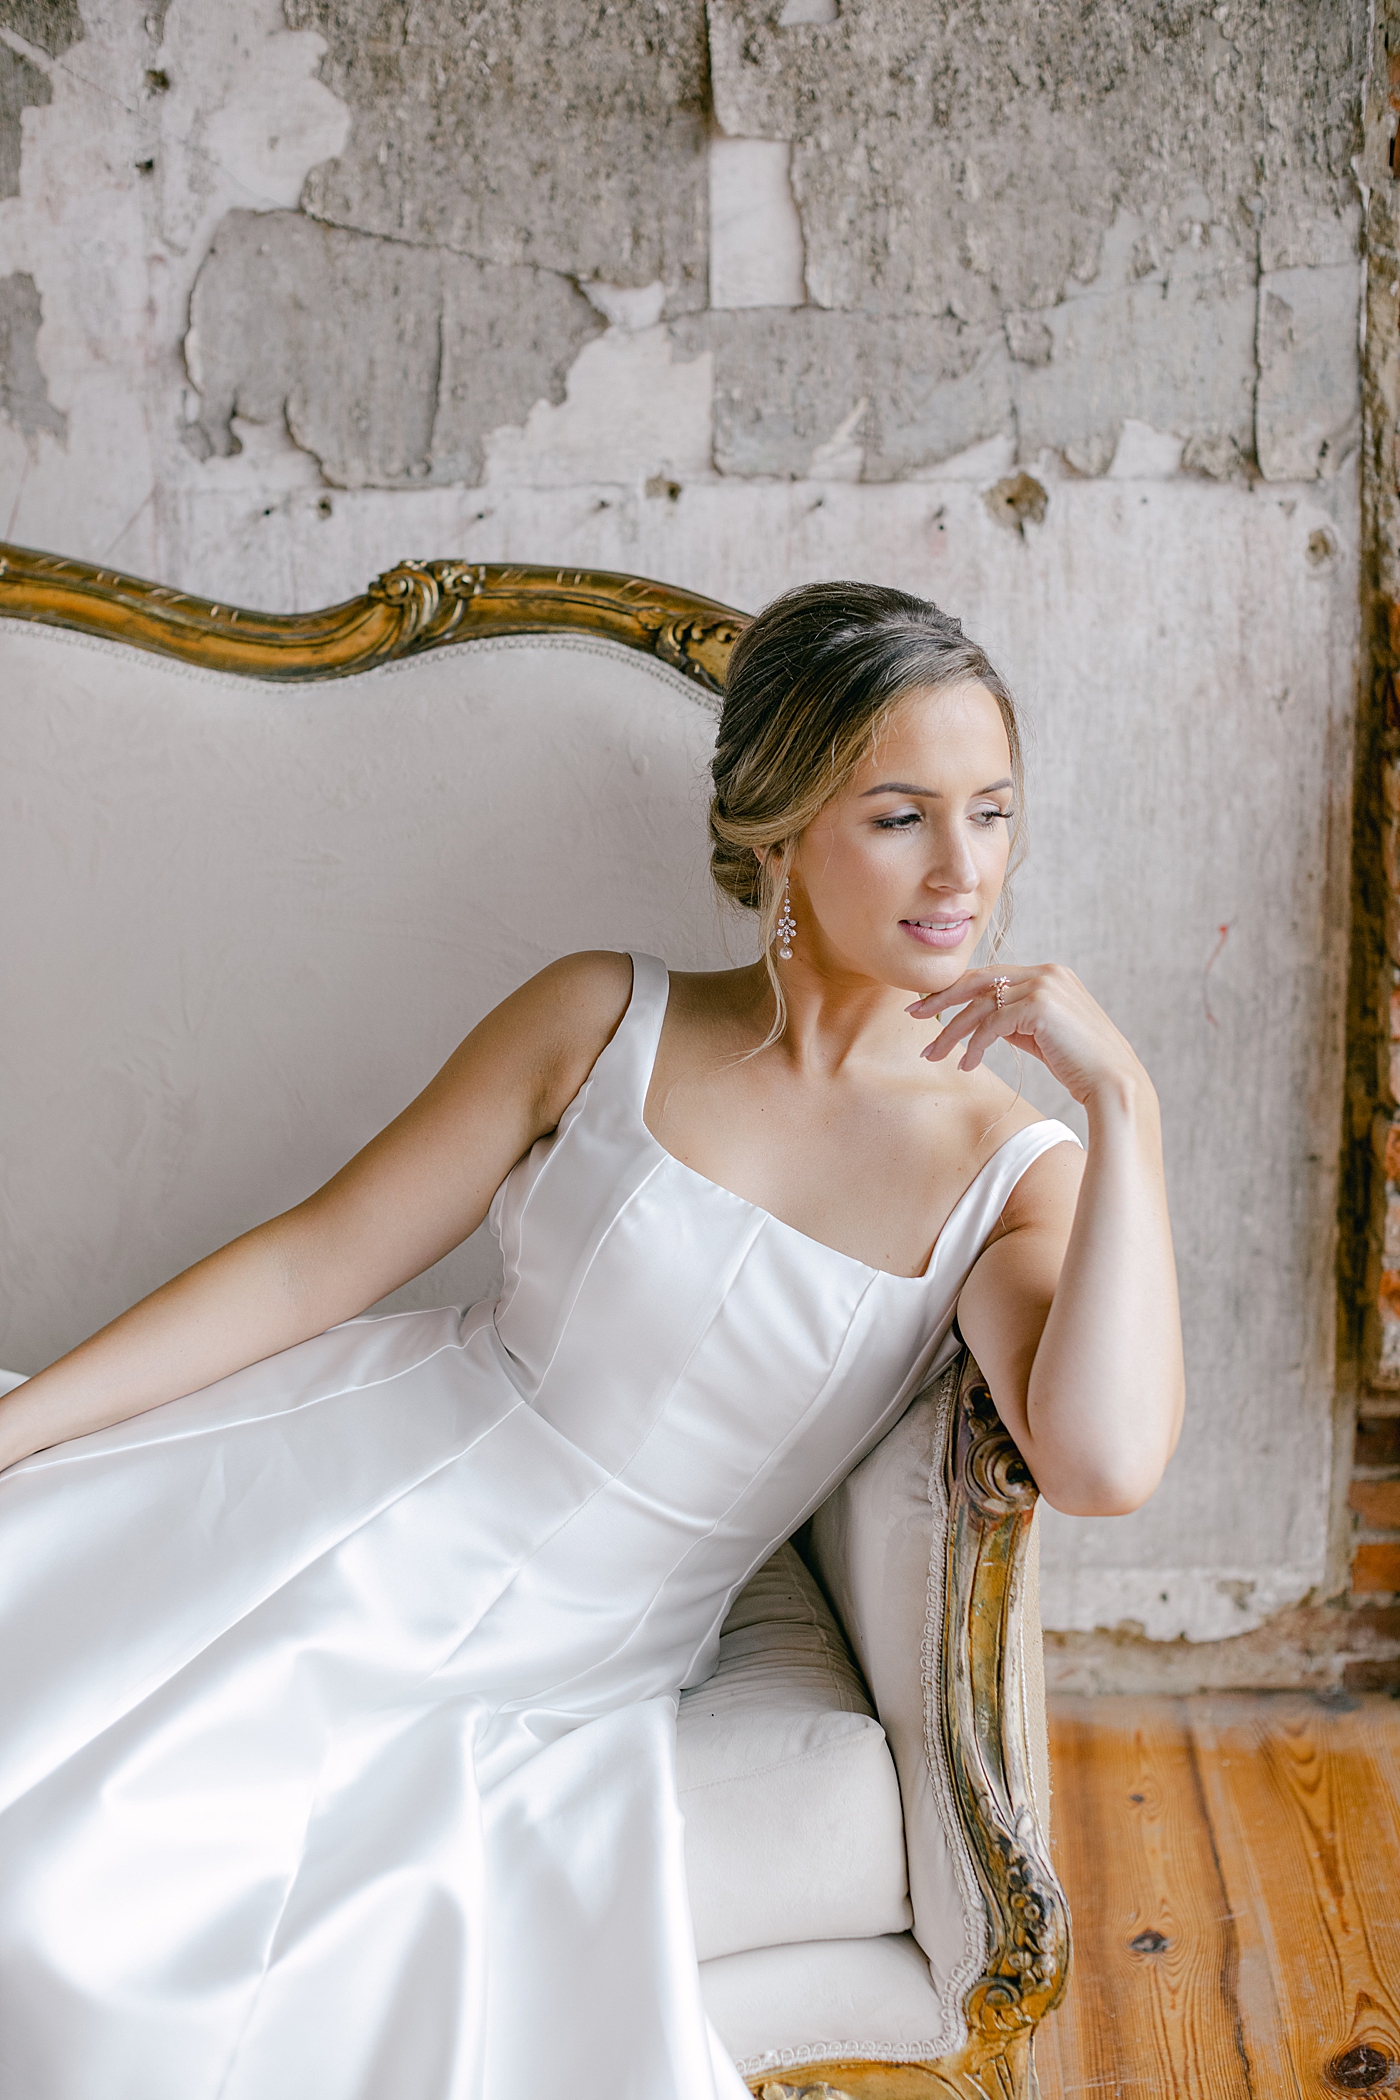 Bride sitting on a chaise lounge in a wedding dress | Excelsior PA Wedding Photography by Hope Helmuth Photography